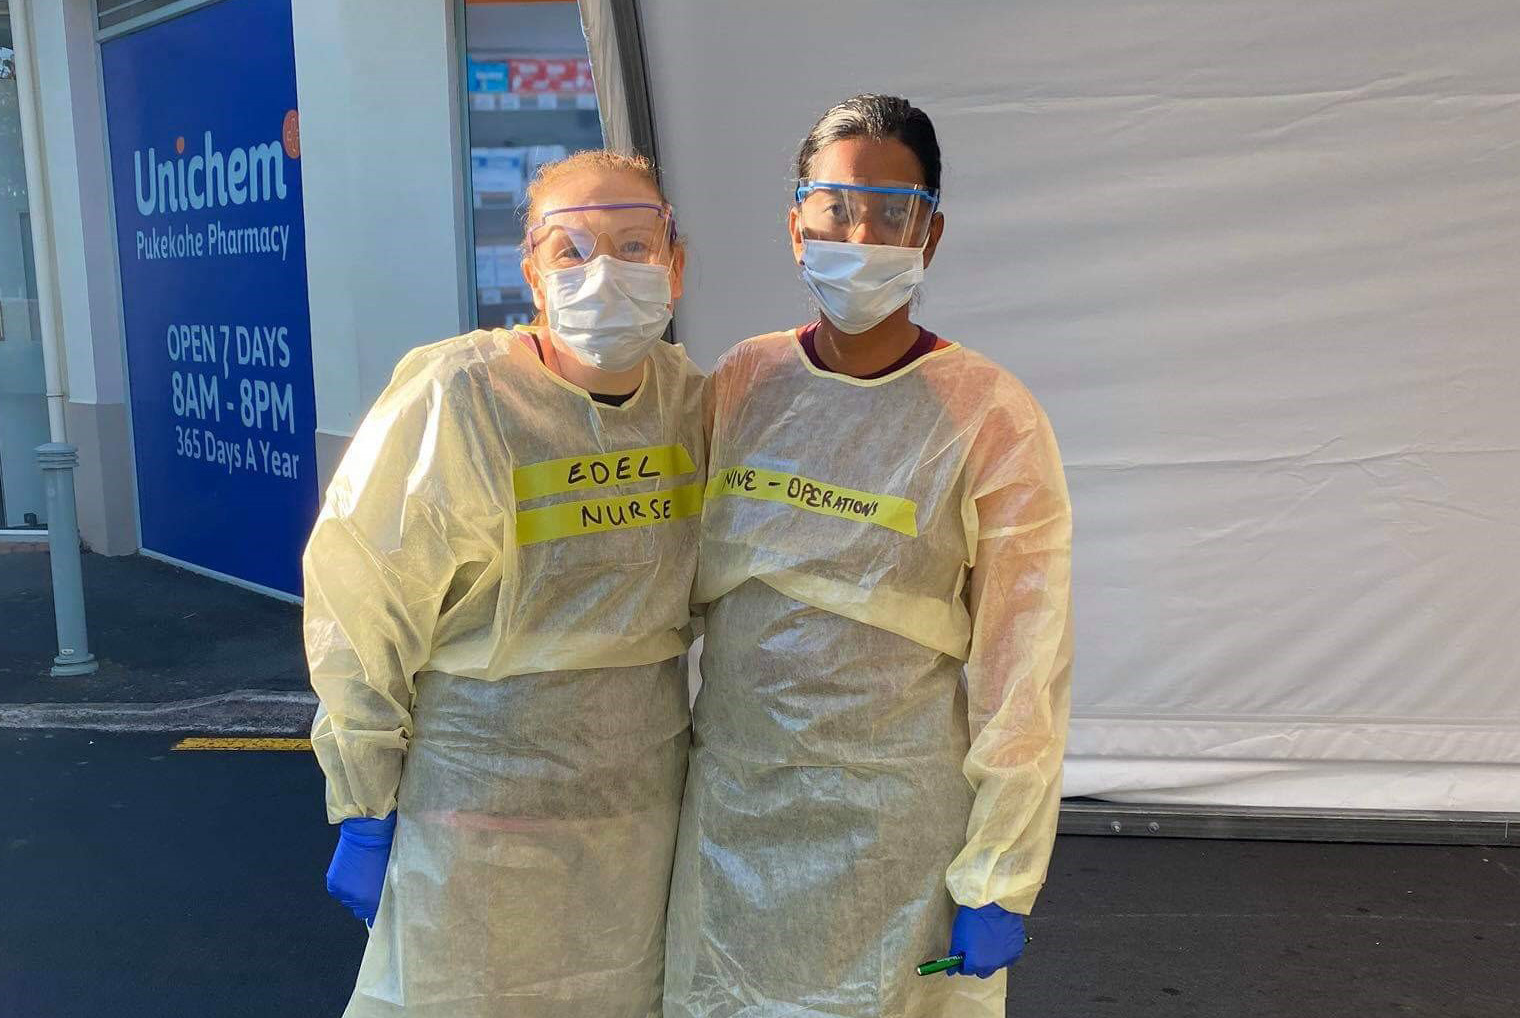 Nive and a colleague wearing gloves, masks and other protective clothing 